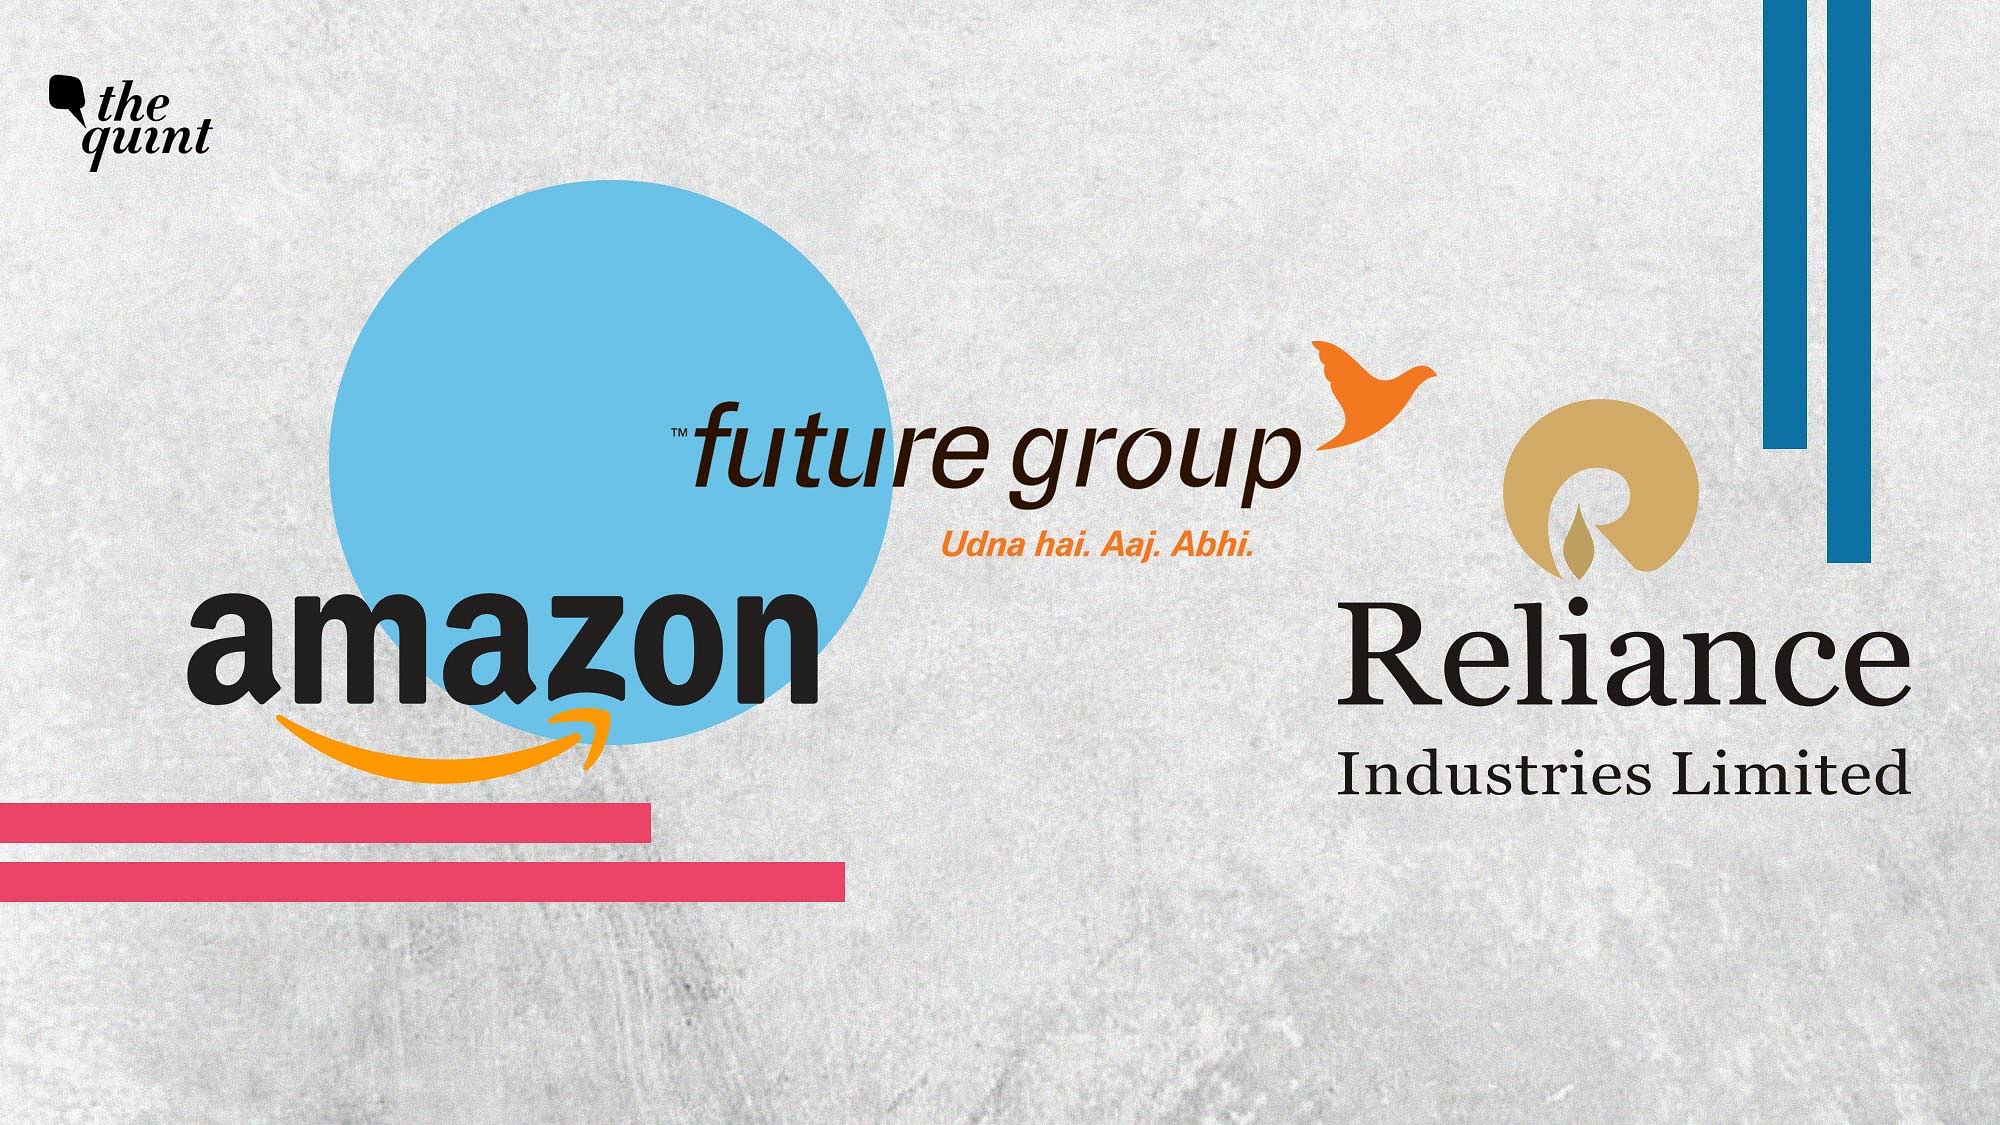 Amazon had opposed to Future group from proceeding with $3.38 billion deal with Reliance.